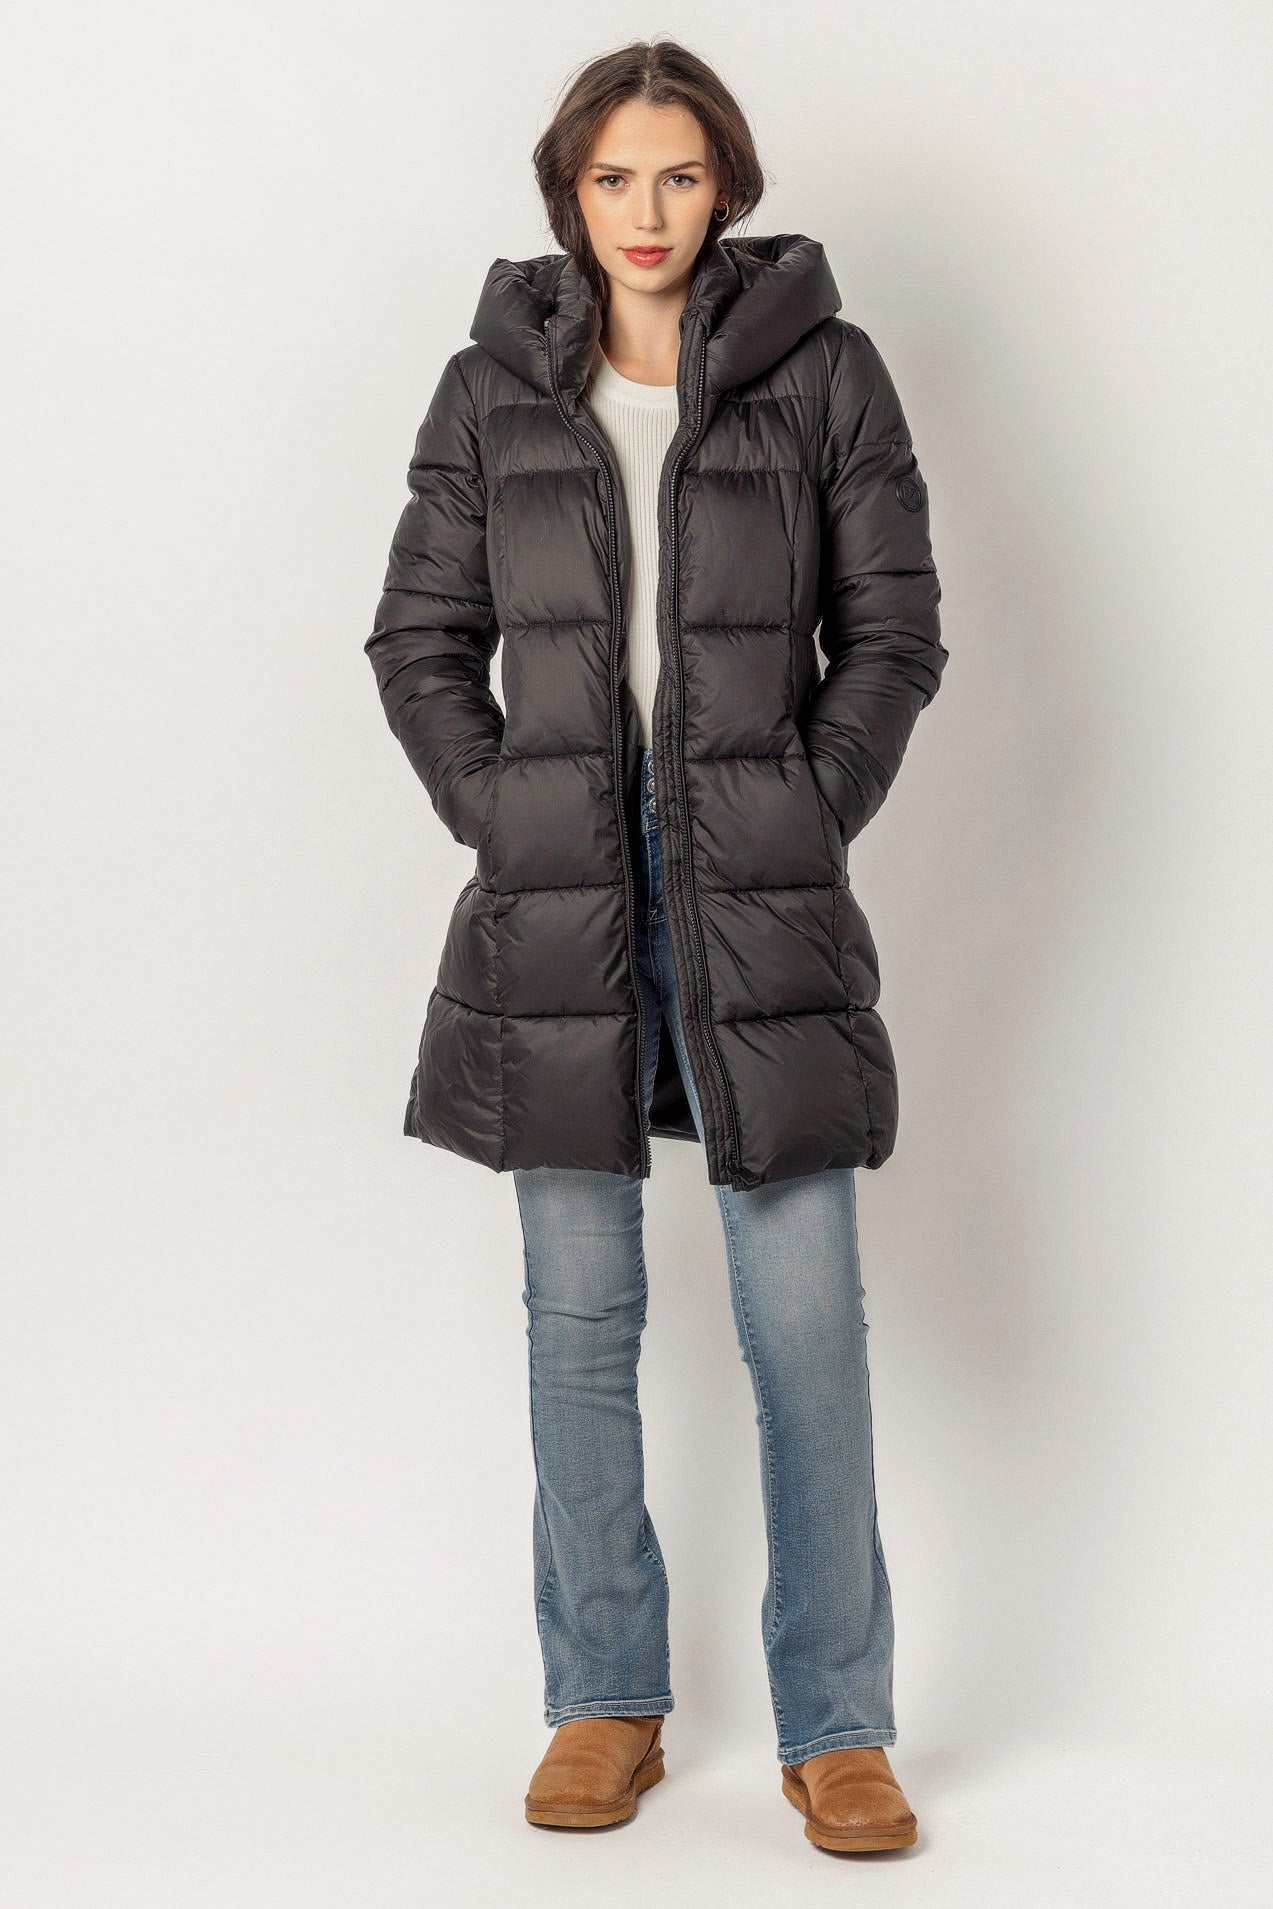 Coats Co. | Long Quilted Eco-Down Puffer Jacket by Point Zero | Coats Co.